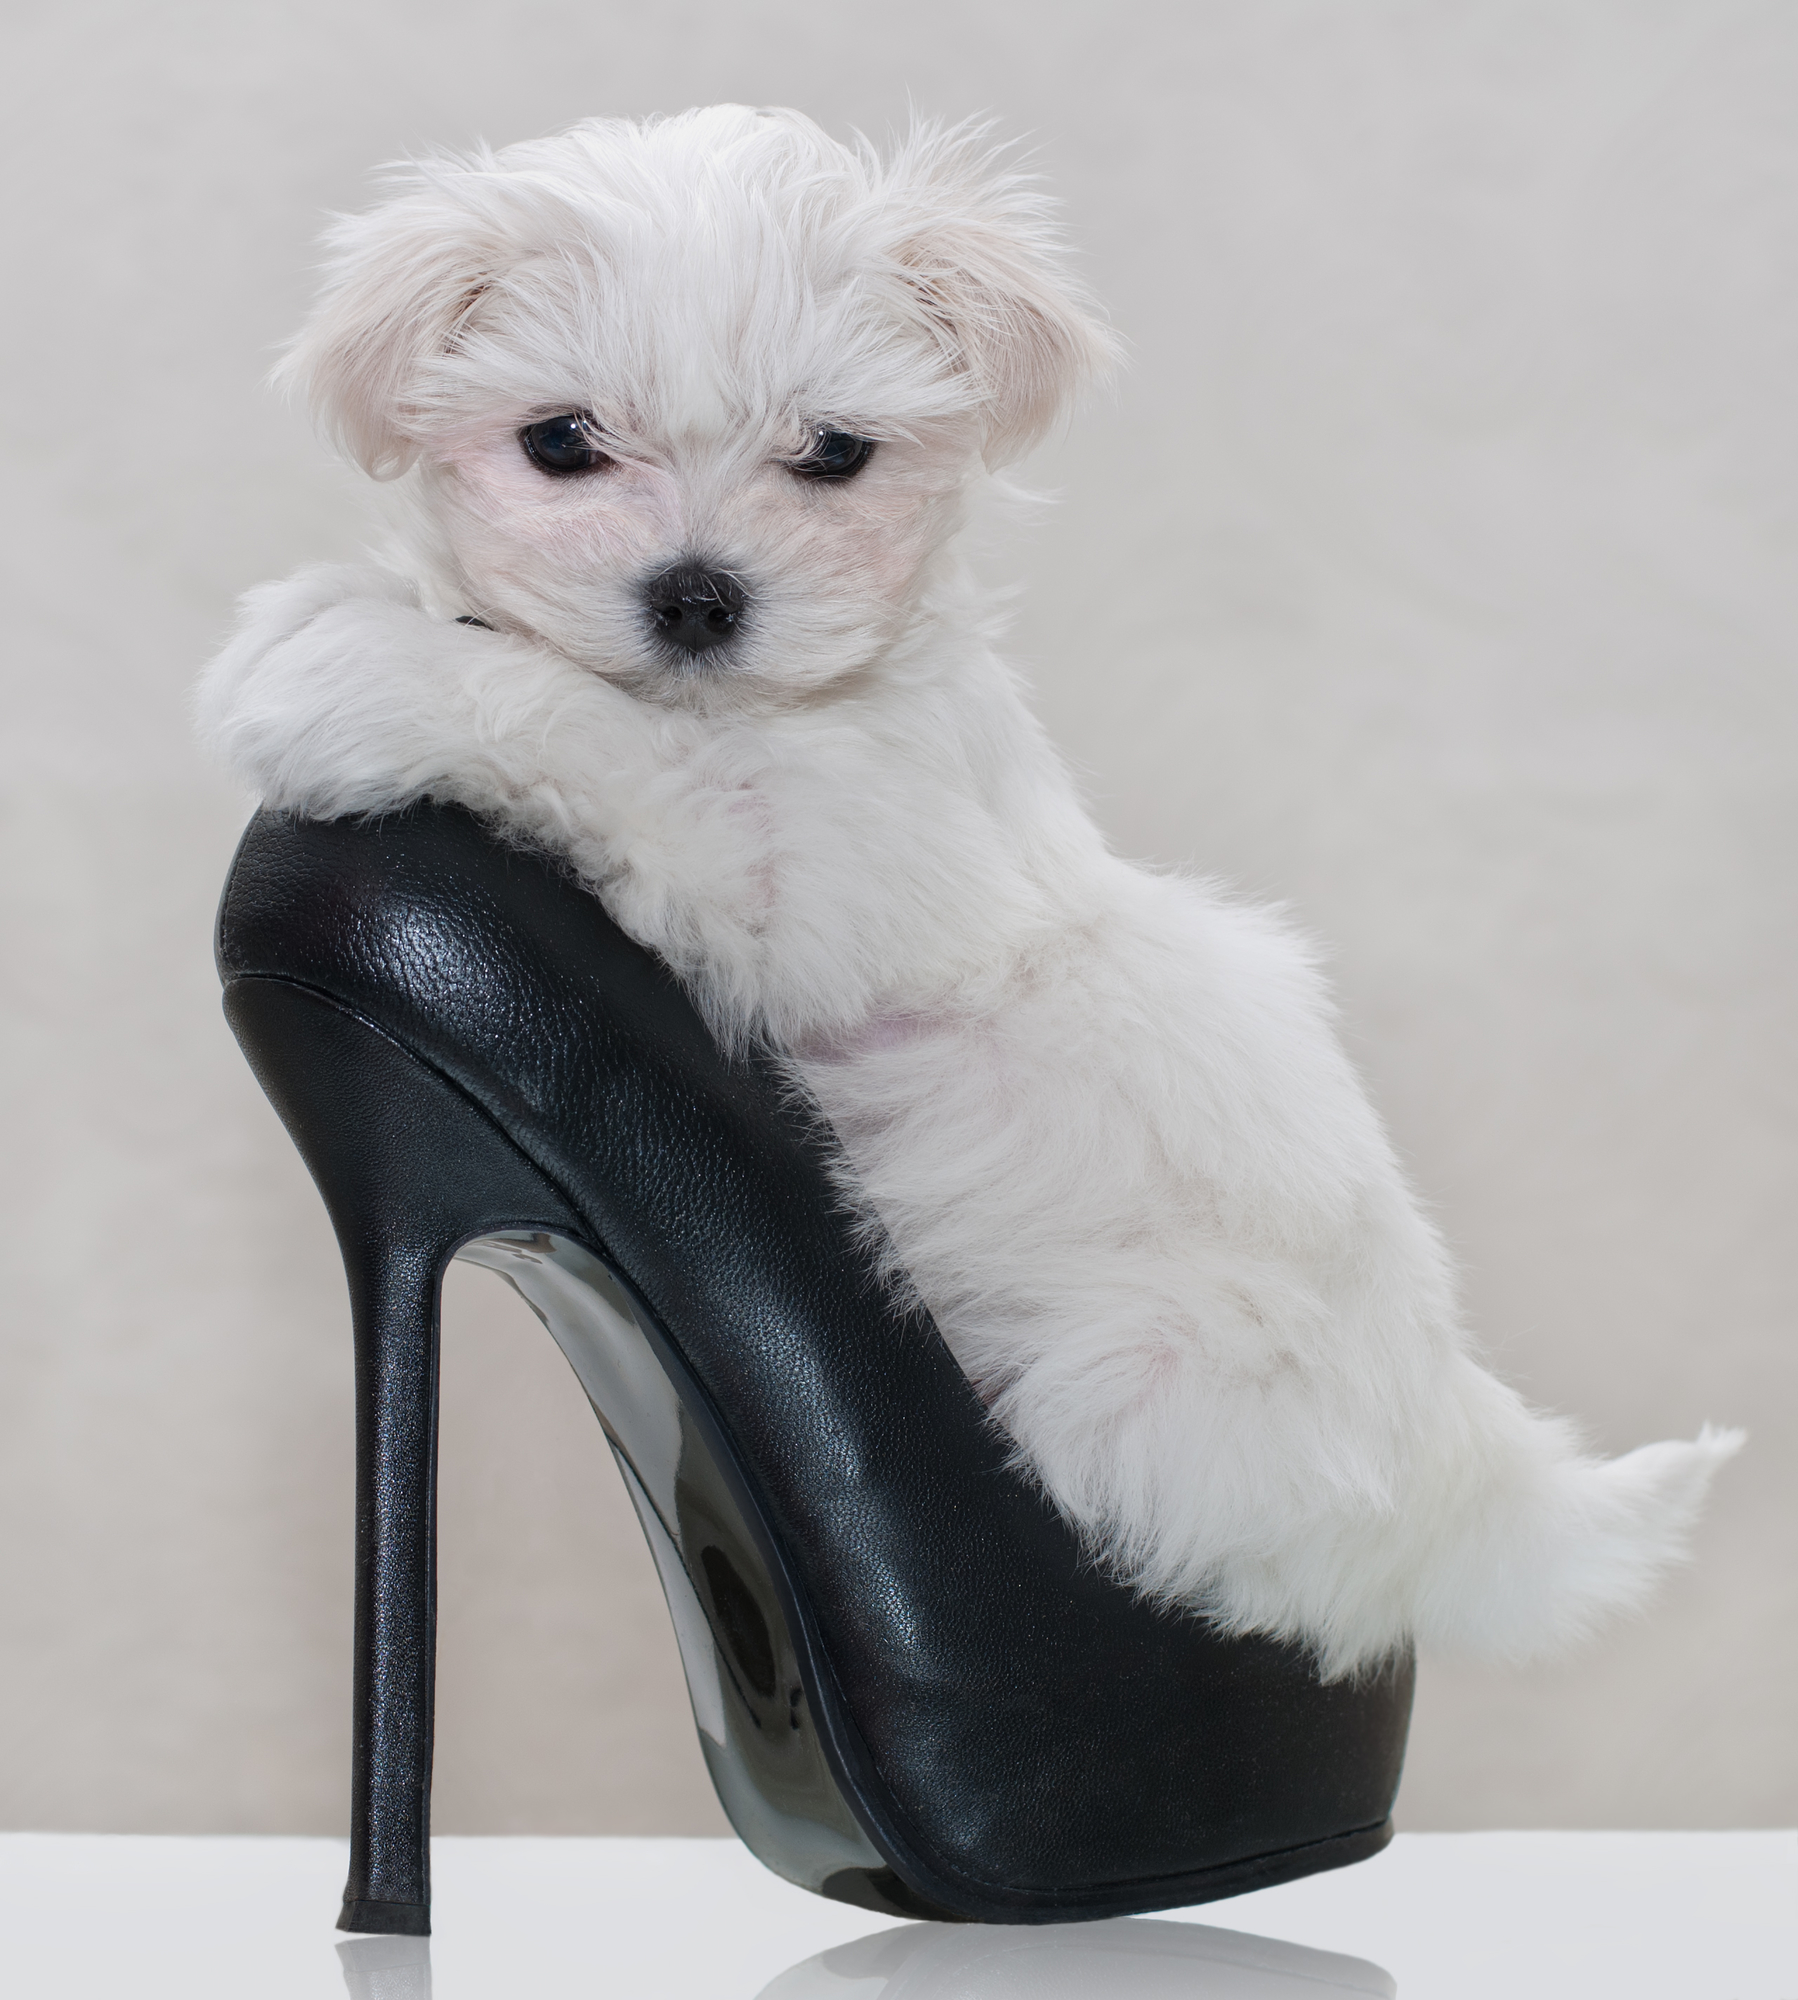 Dog fashion in one place on new G+ page